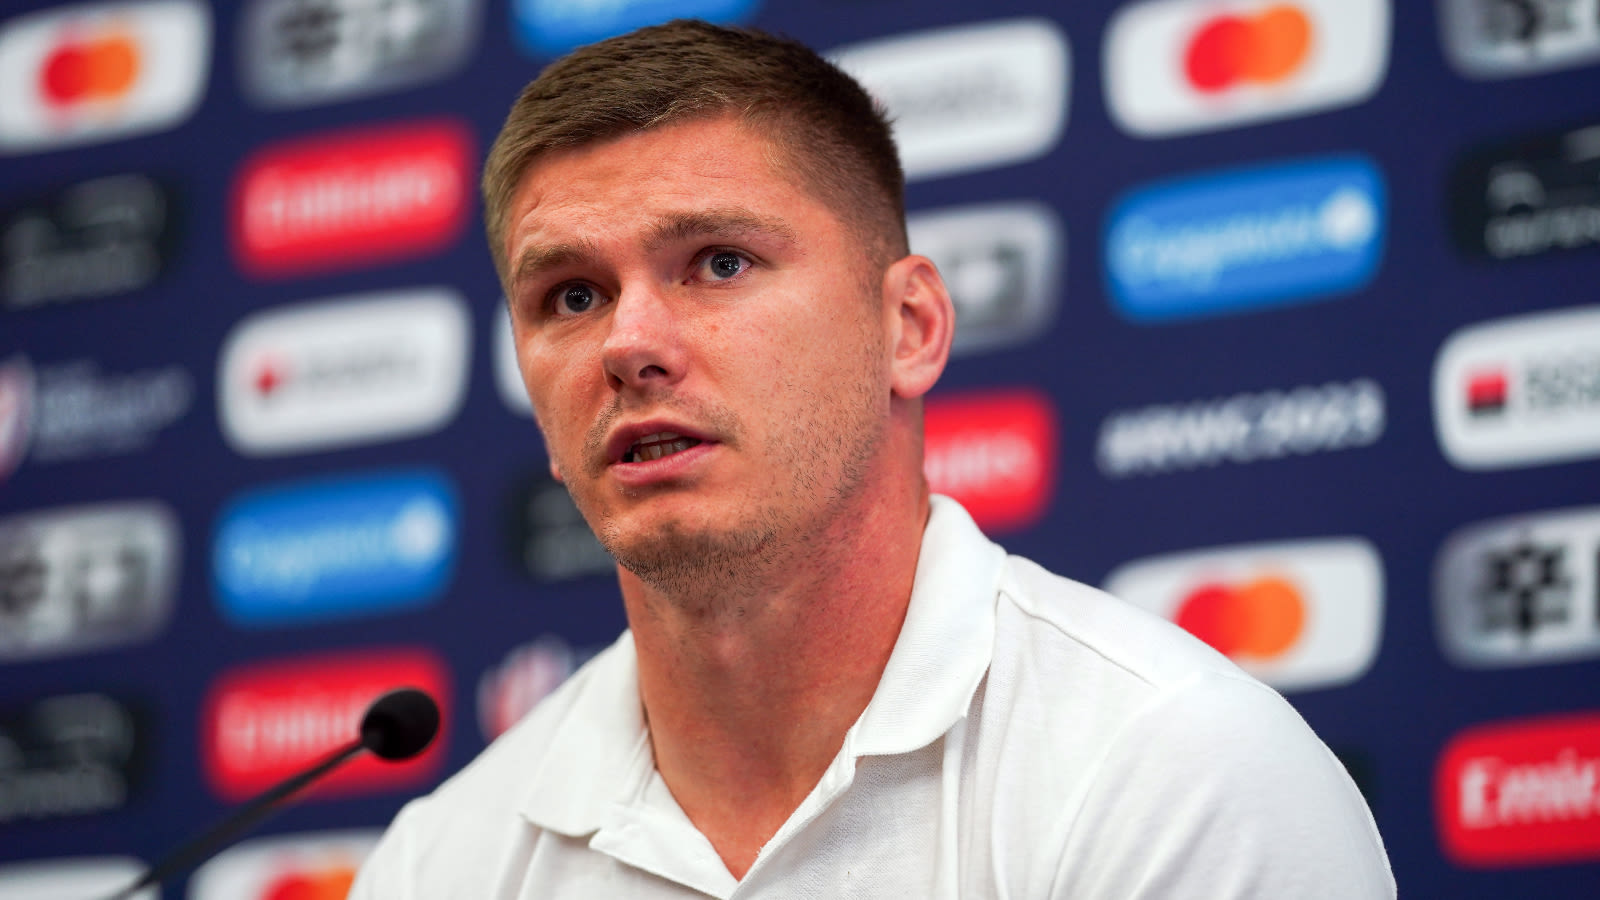 Owen Farrell: Treatment of England rugby captain labelled 'shameful' and 'shocking'